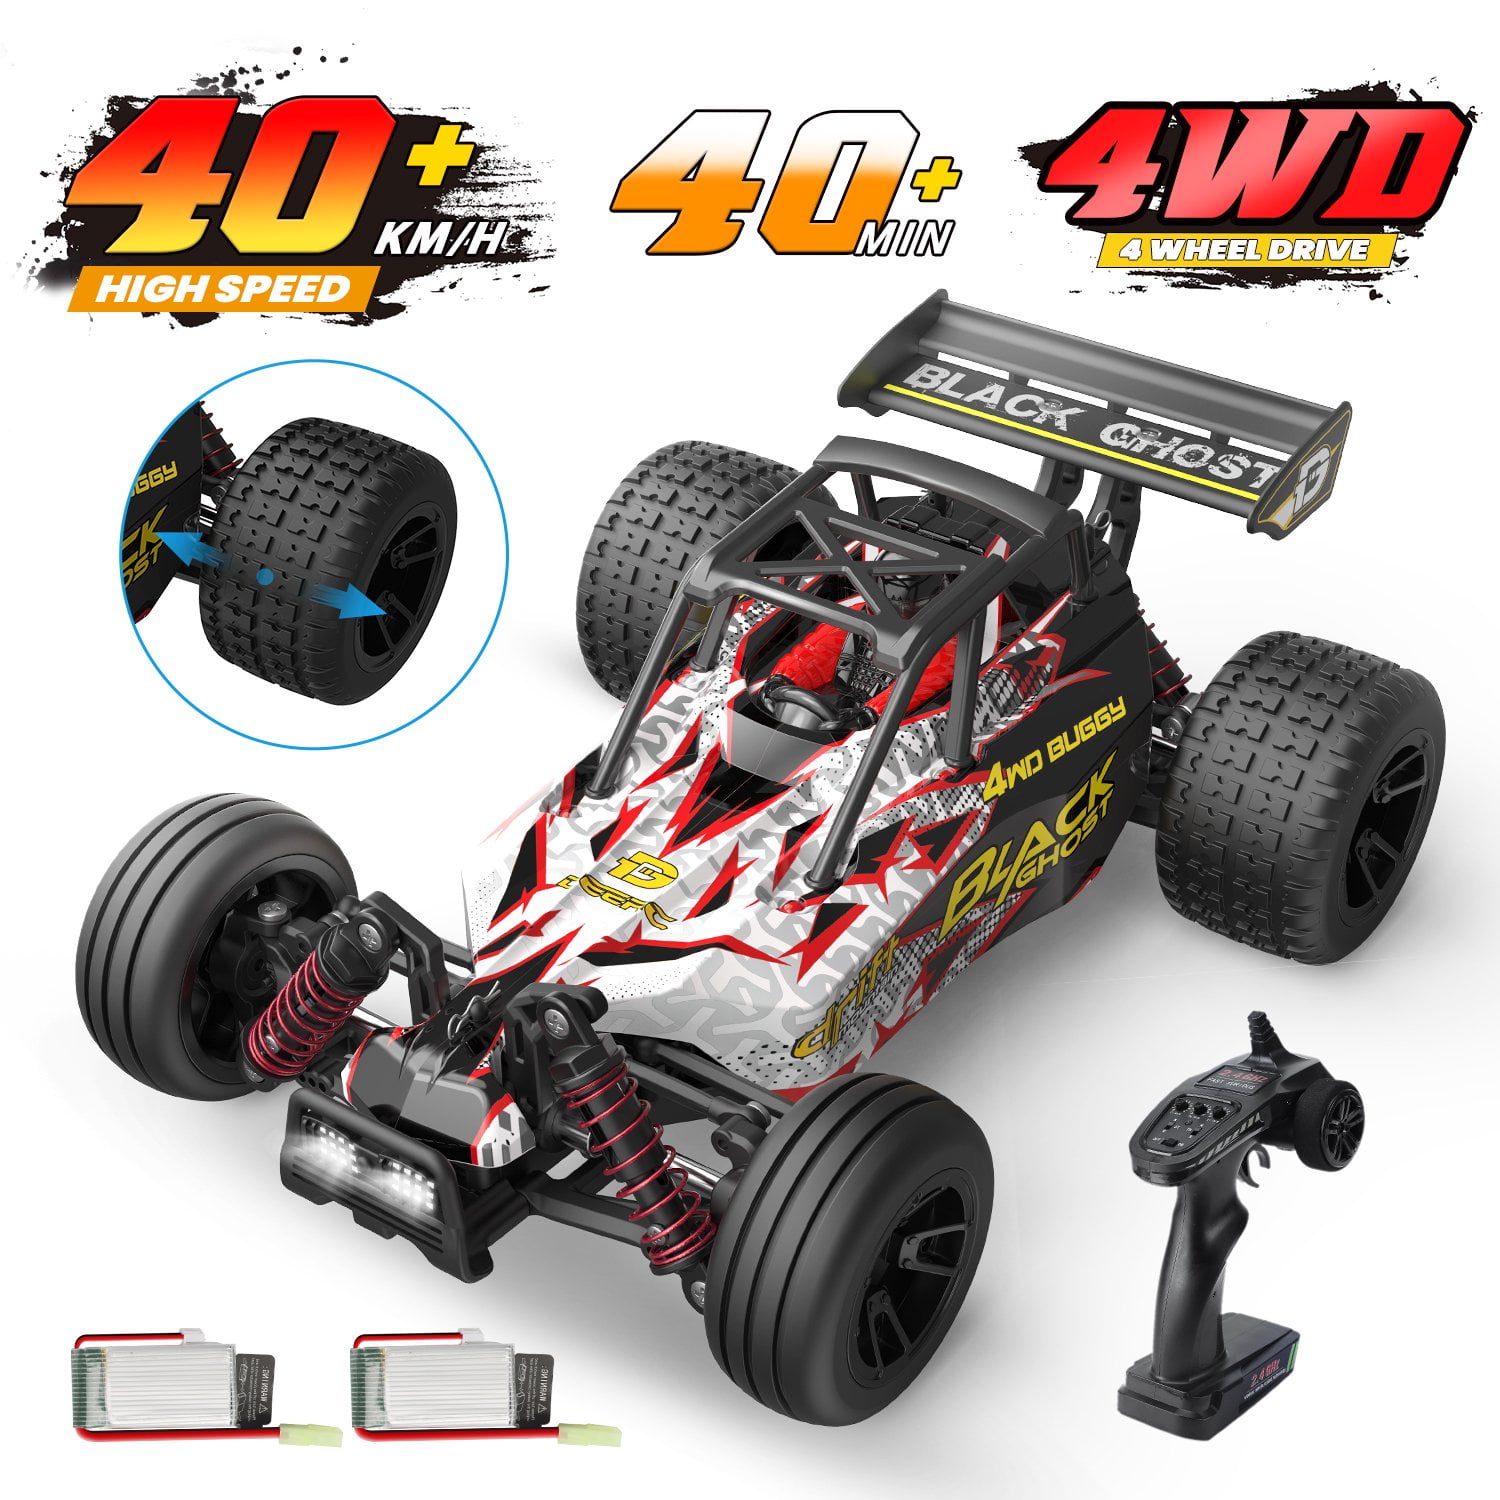 DEERC RC Cars 1:10 Scale Large High Speed Remote Control Car for Adults Kids, 